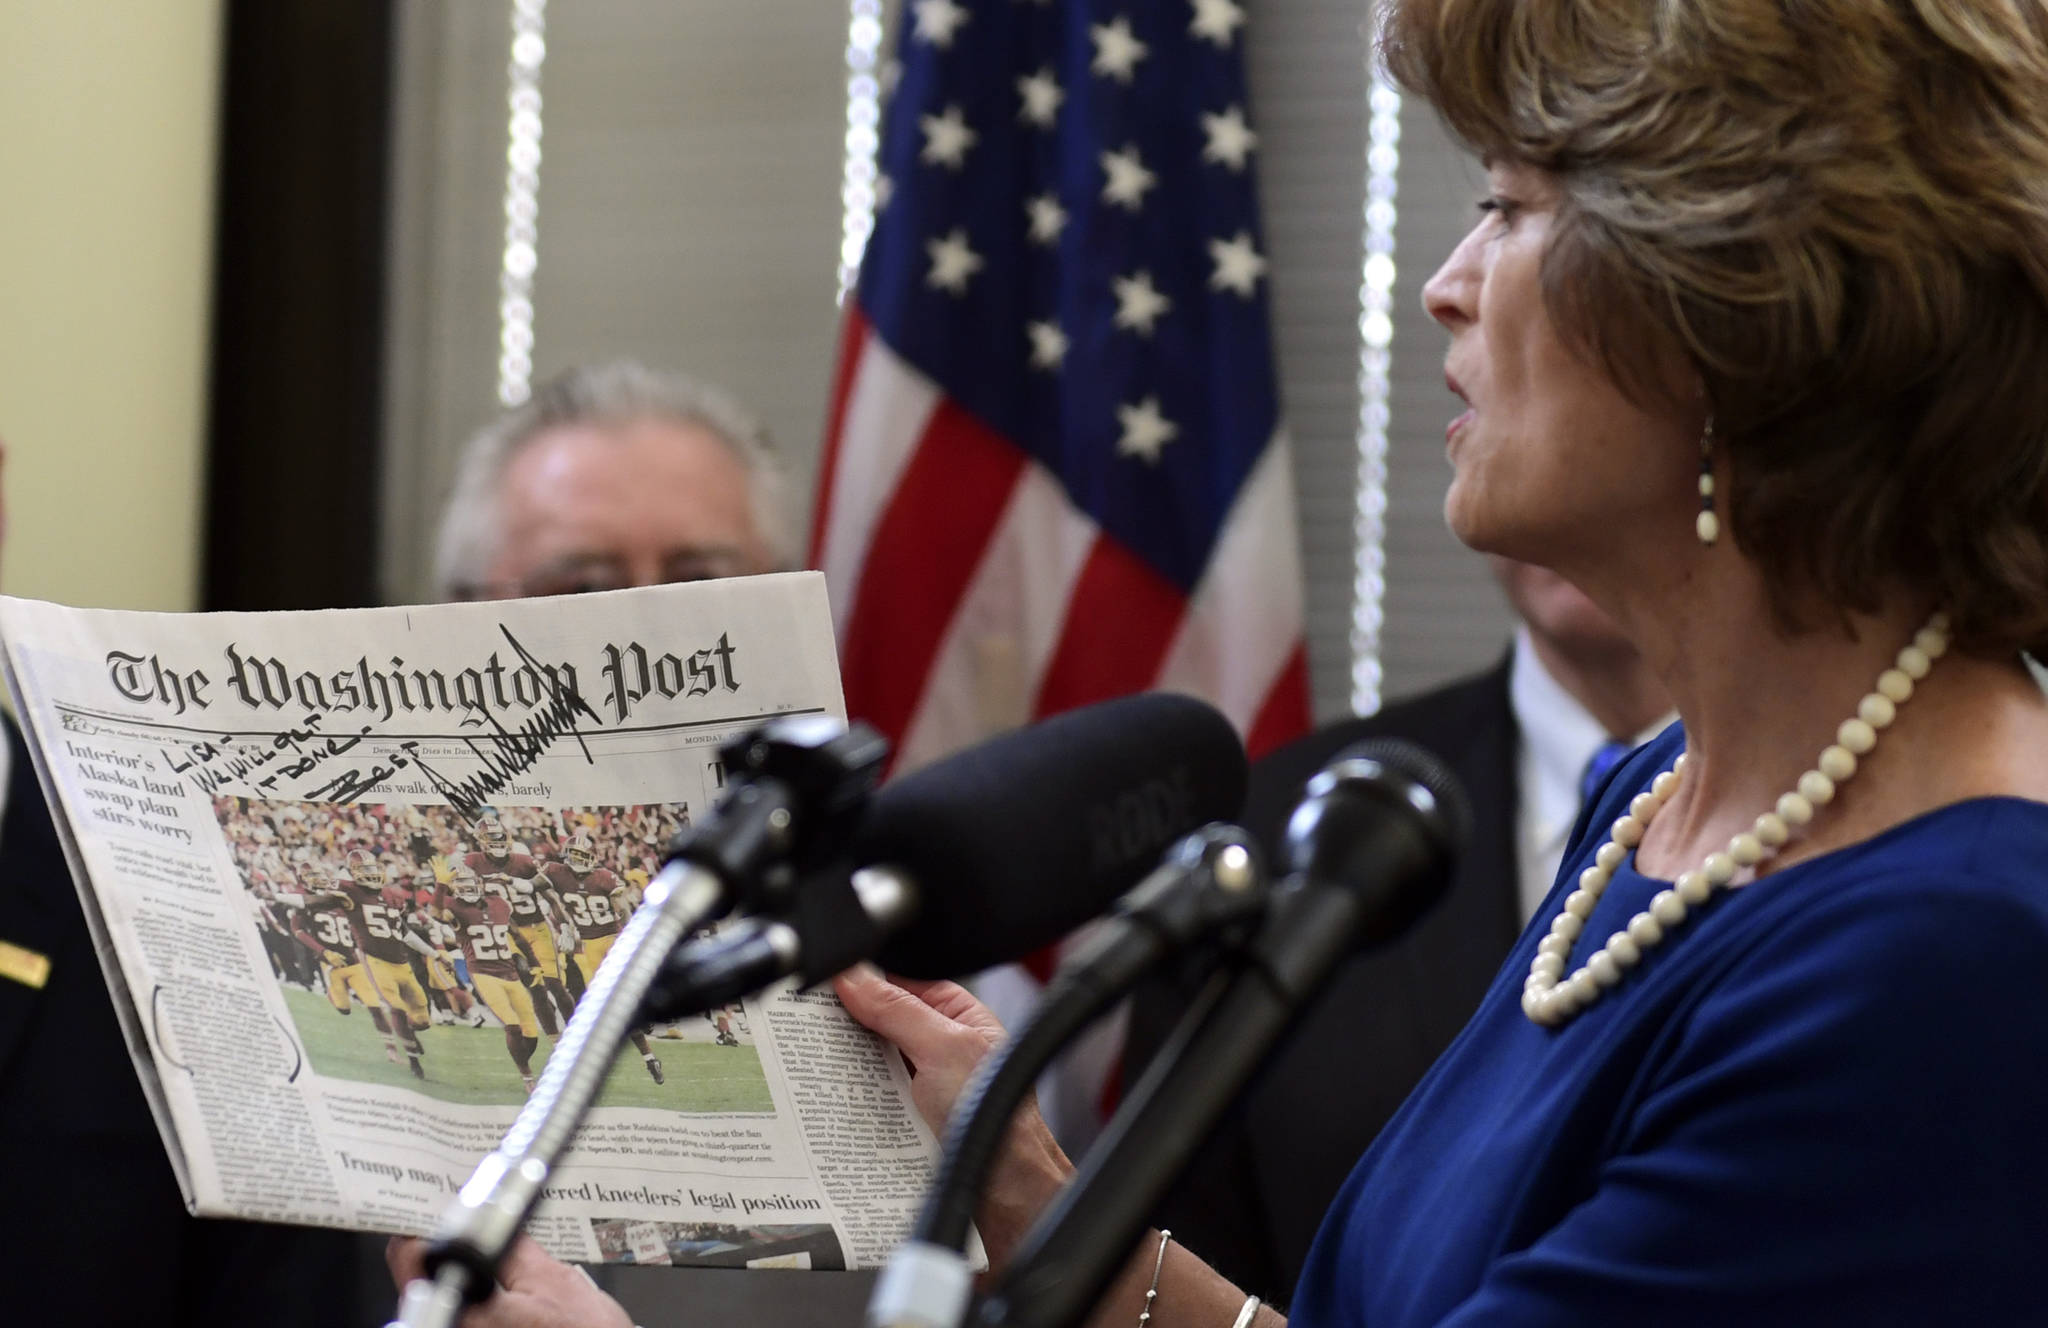 Sen. Lisa Murkowski, R-Alaska, holds up a copy of a news paper with a note from President Donald Trump during an event in her office on Capitol Hill in Washington, Monday, Jan. 22, 2018. Murkowski was joined by other Alaskan officials regarding the Interior Department’s decision to the construction of a road through a national wildlife refuge in Alaska.The road would connect the communities of King Cove and Cold Bay, which has an all-weather airport needed for emergency medical flights. (AP Photo/Susan Walsh)